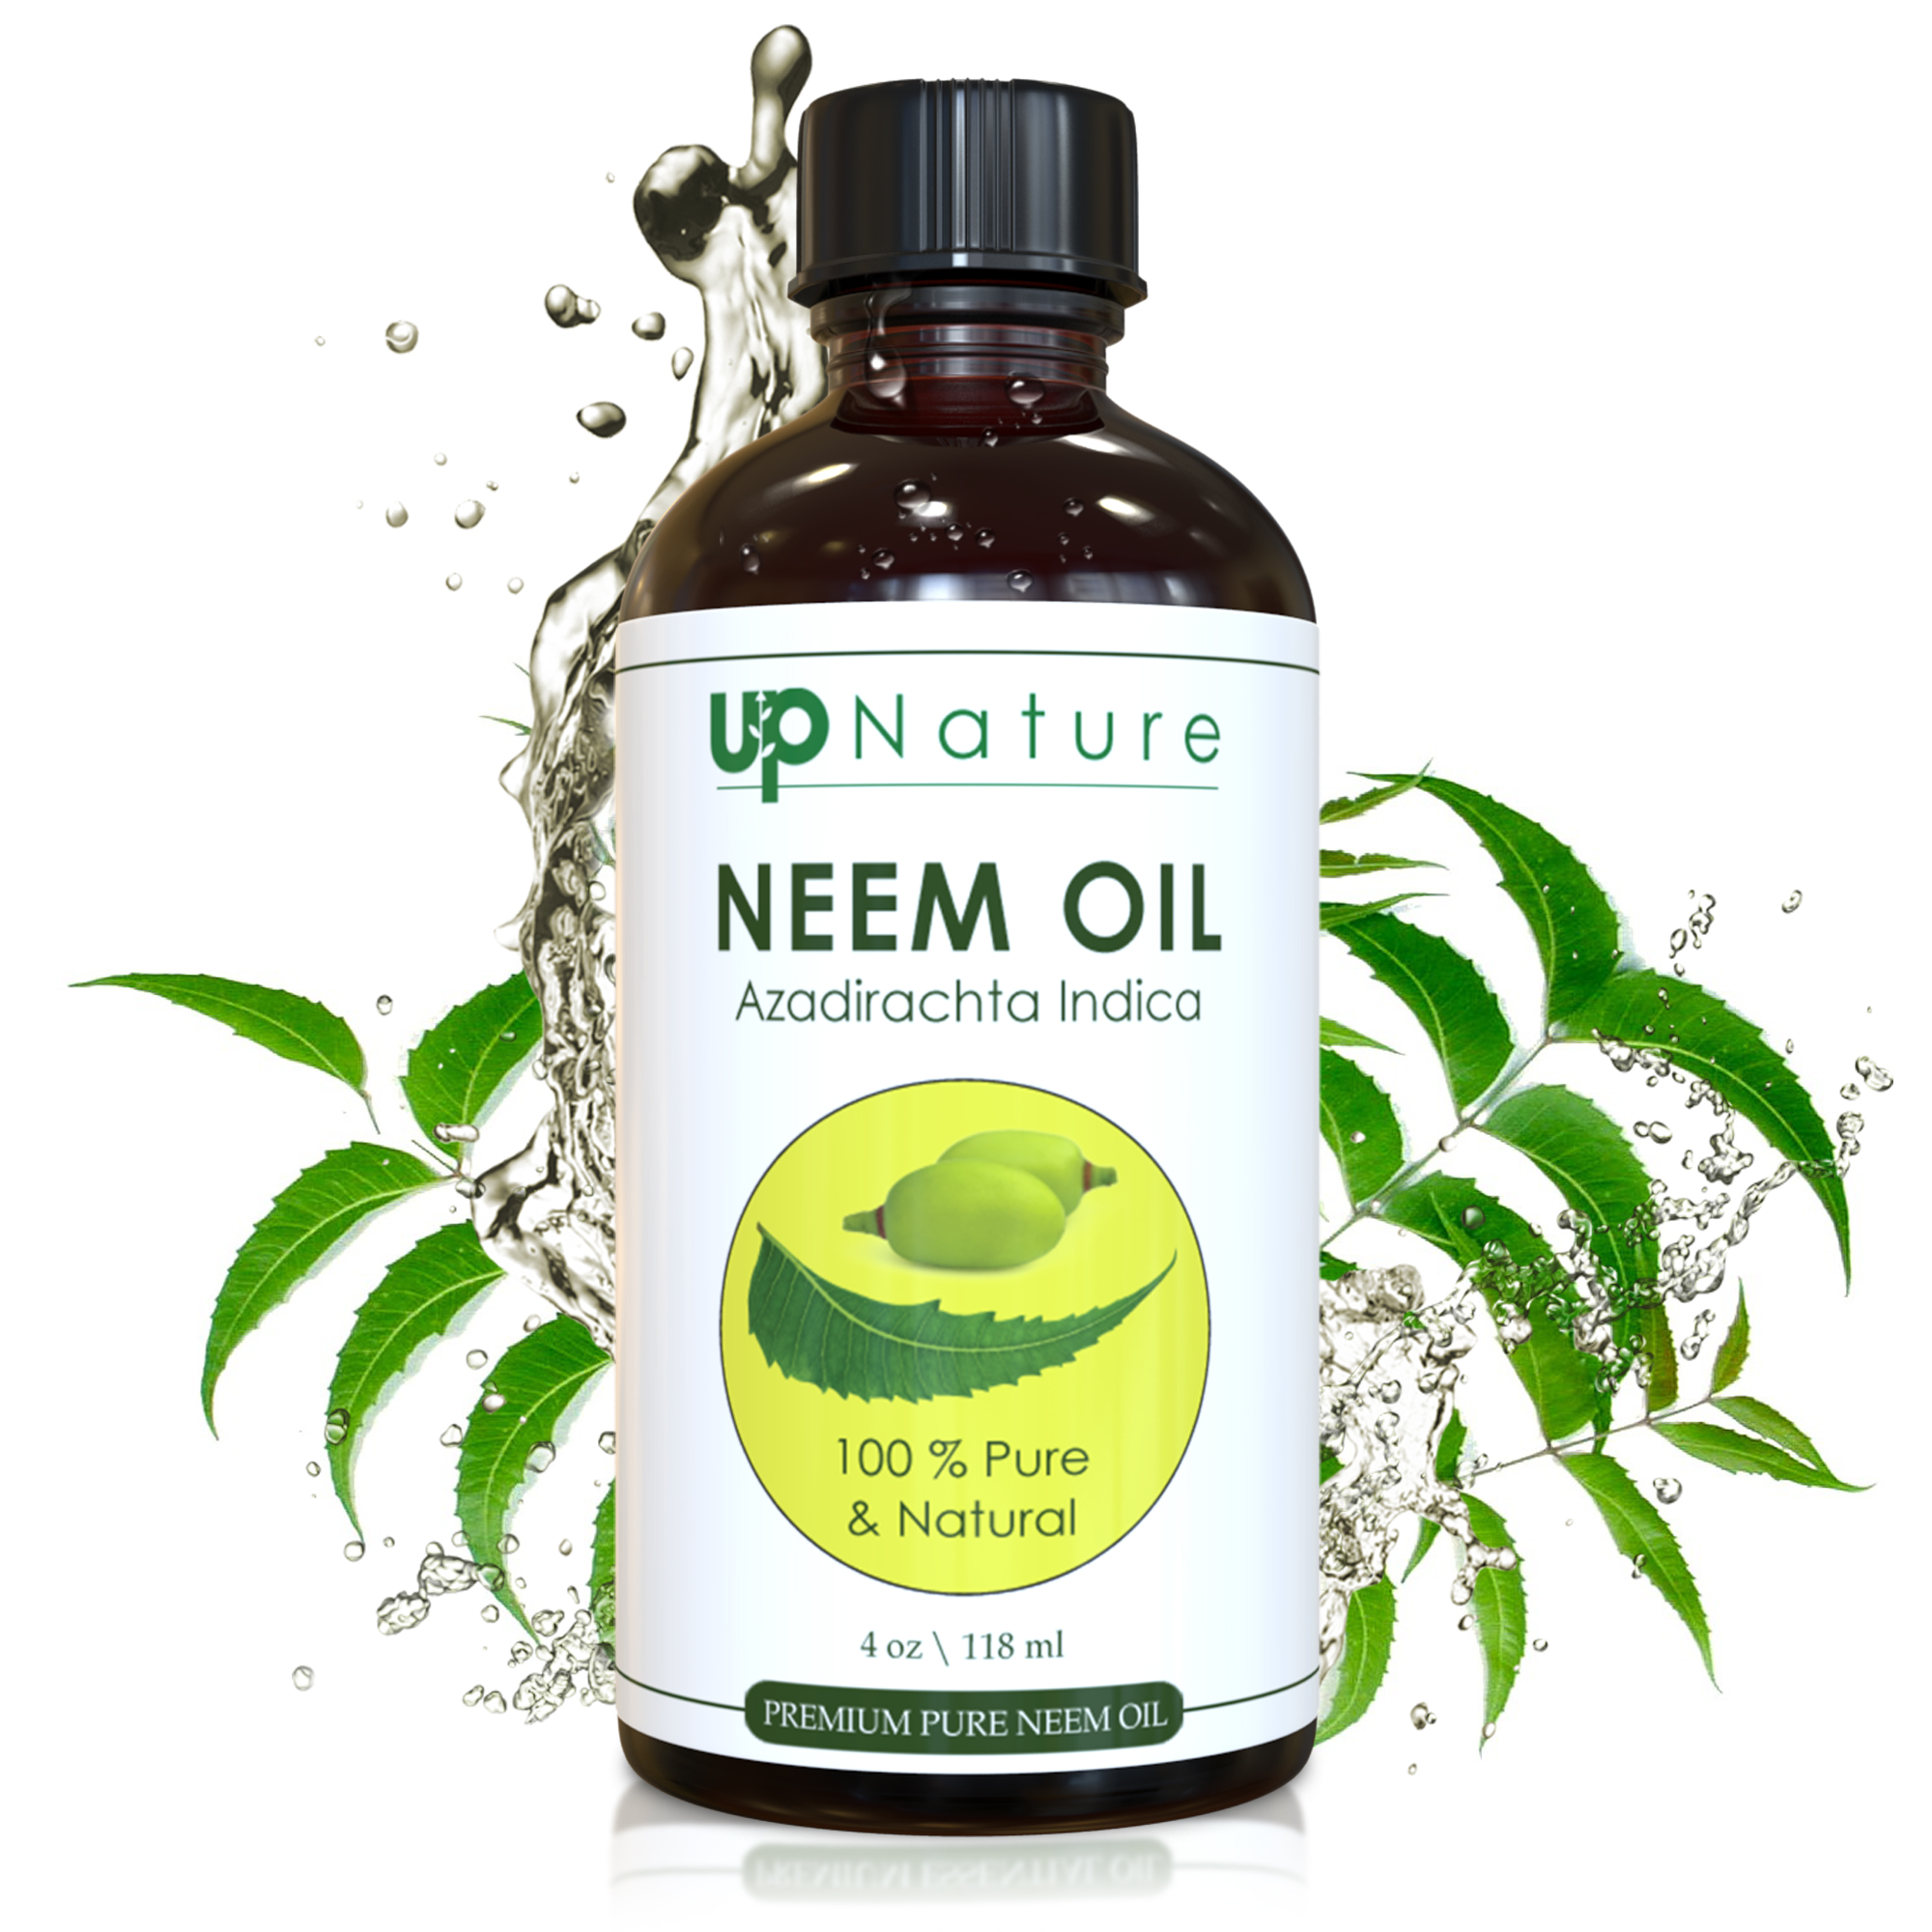 ~Glamamama's Goodies~: UpNature Neem Oil 4 OZ works in the home, garden ...